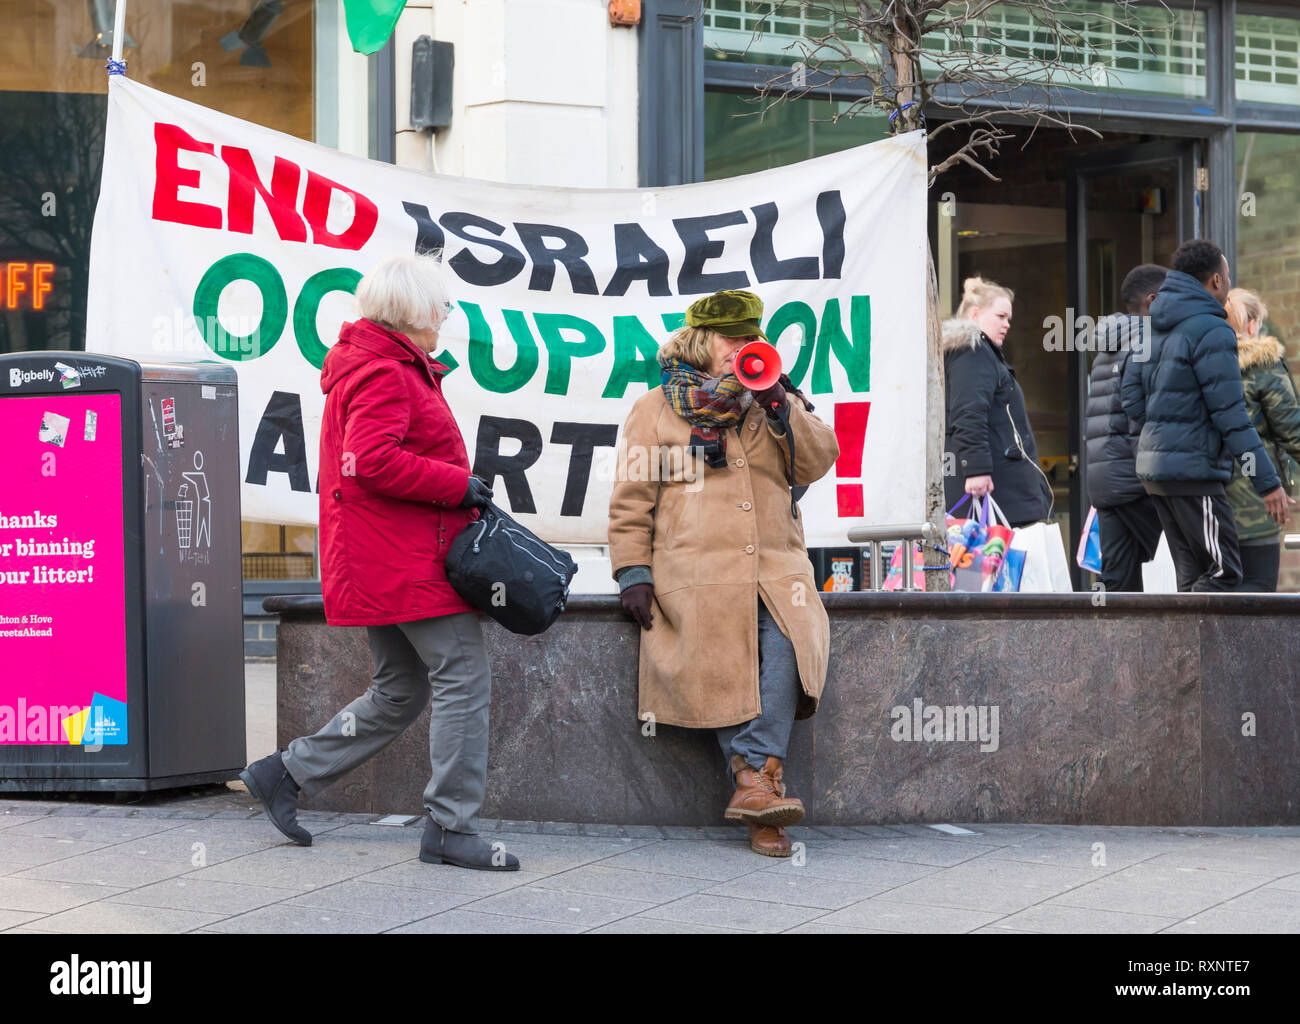 BHPSC protesters in Brighton (East Sussex, UK) protesting against military Israeli occupation of Palestinian lands. Stock Photo